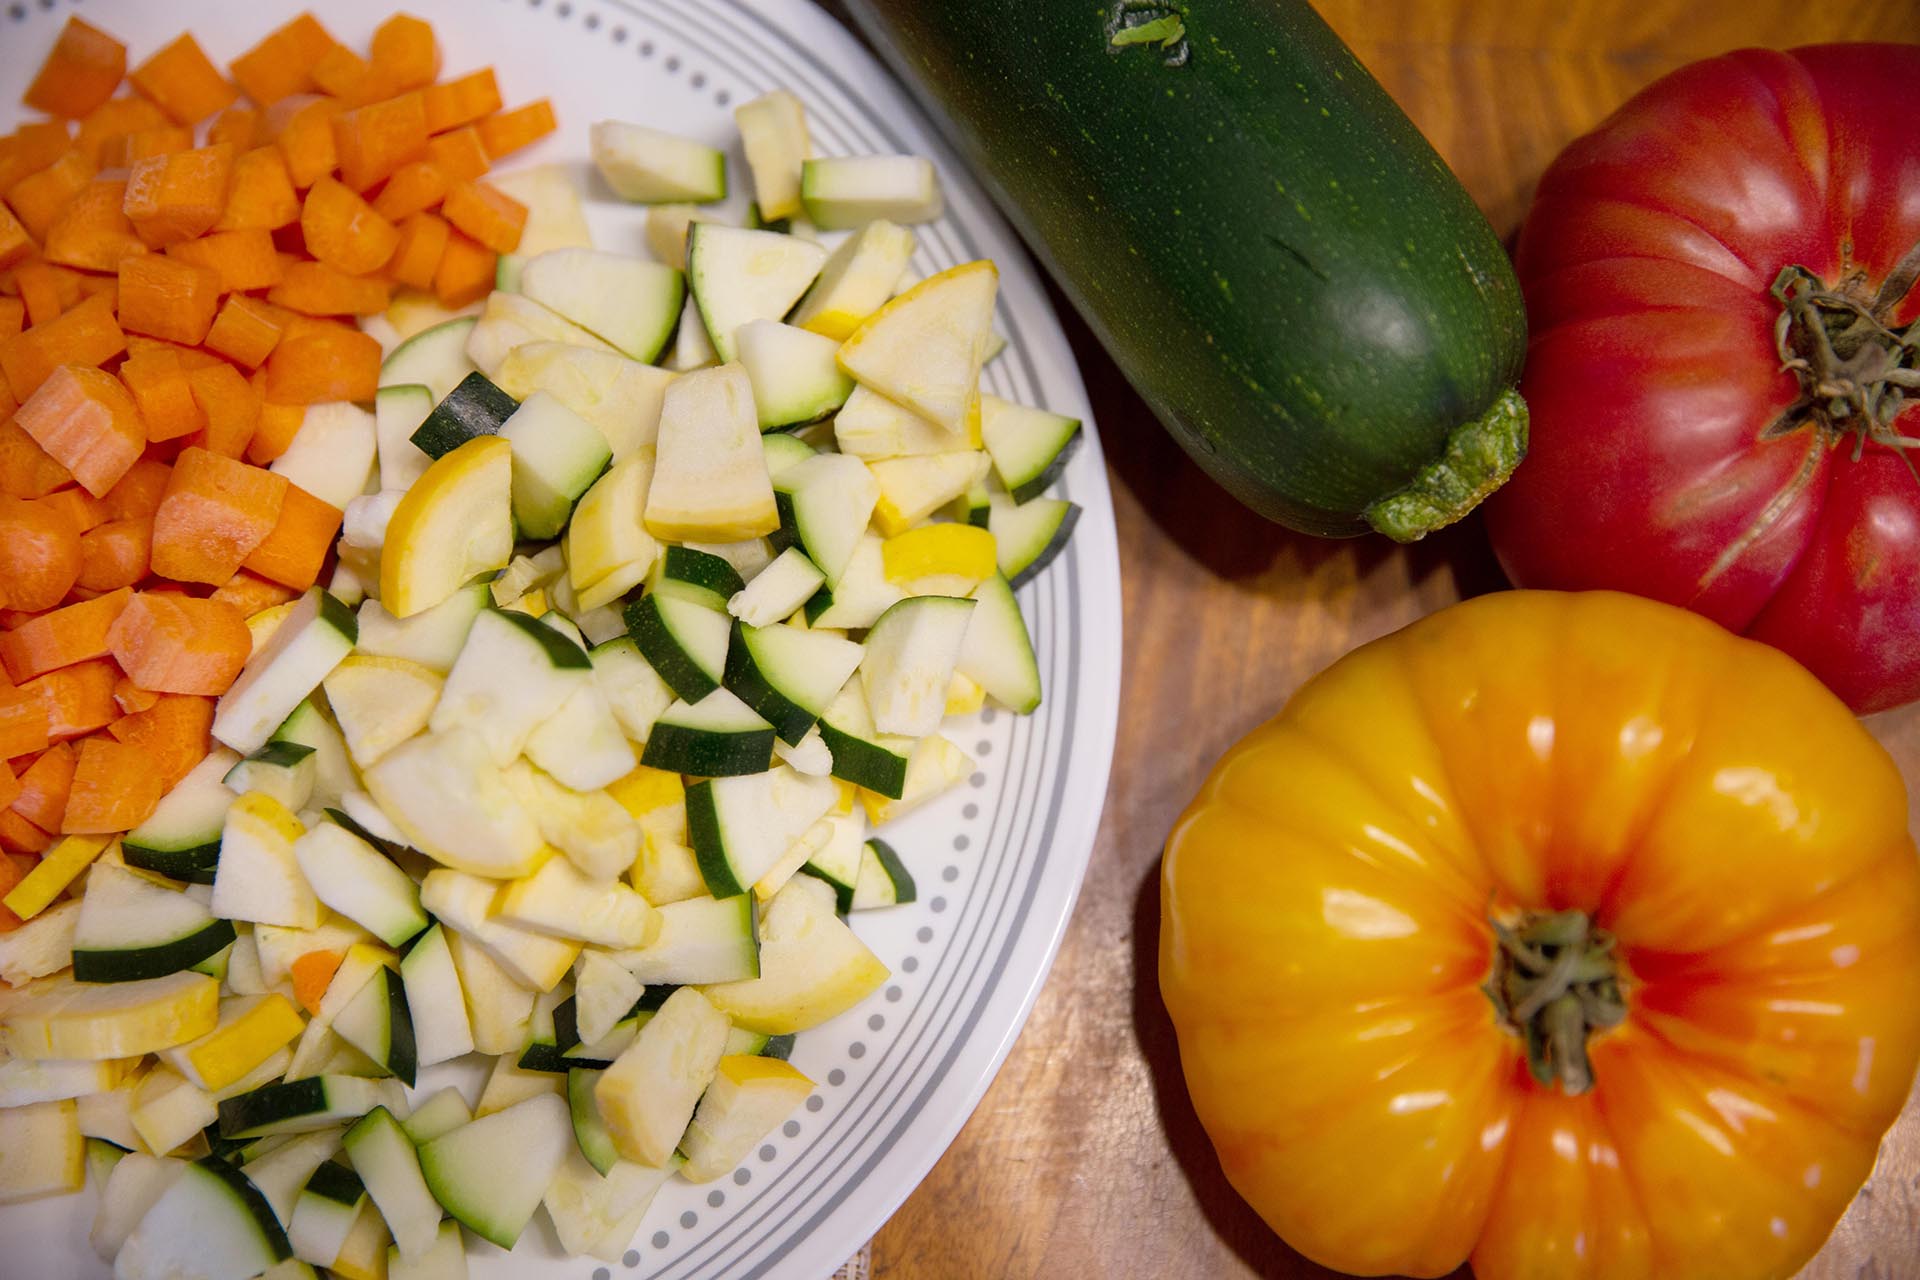 A photo of tomatoes and zucchini